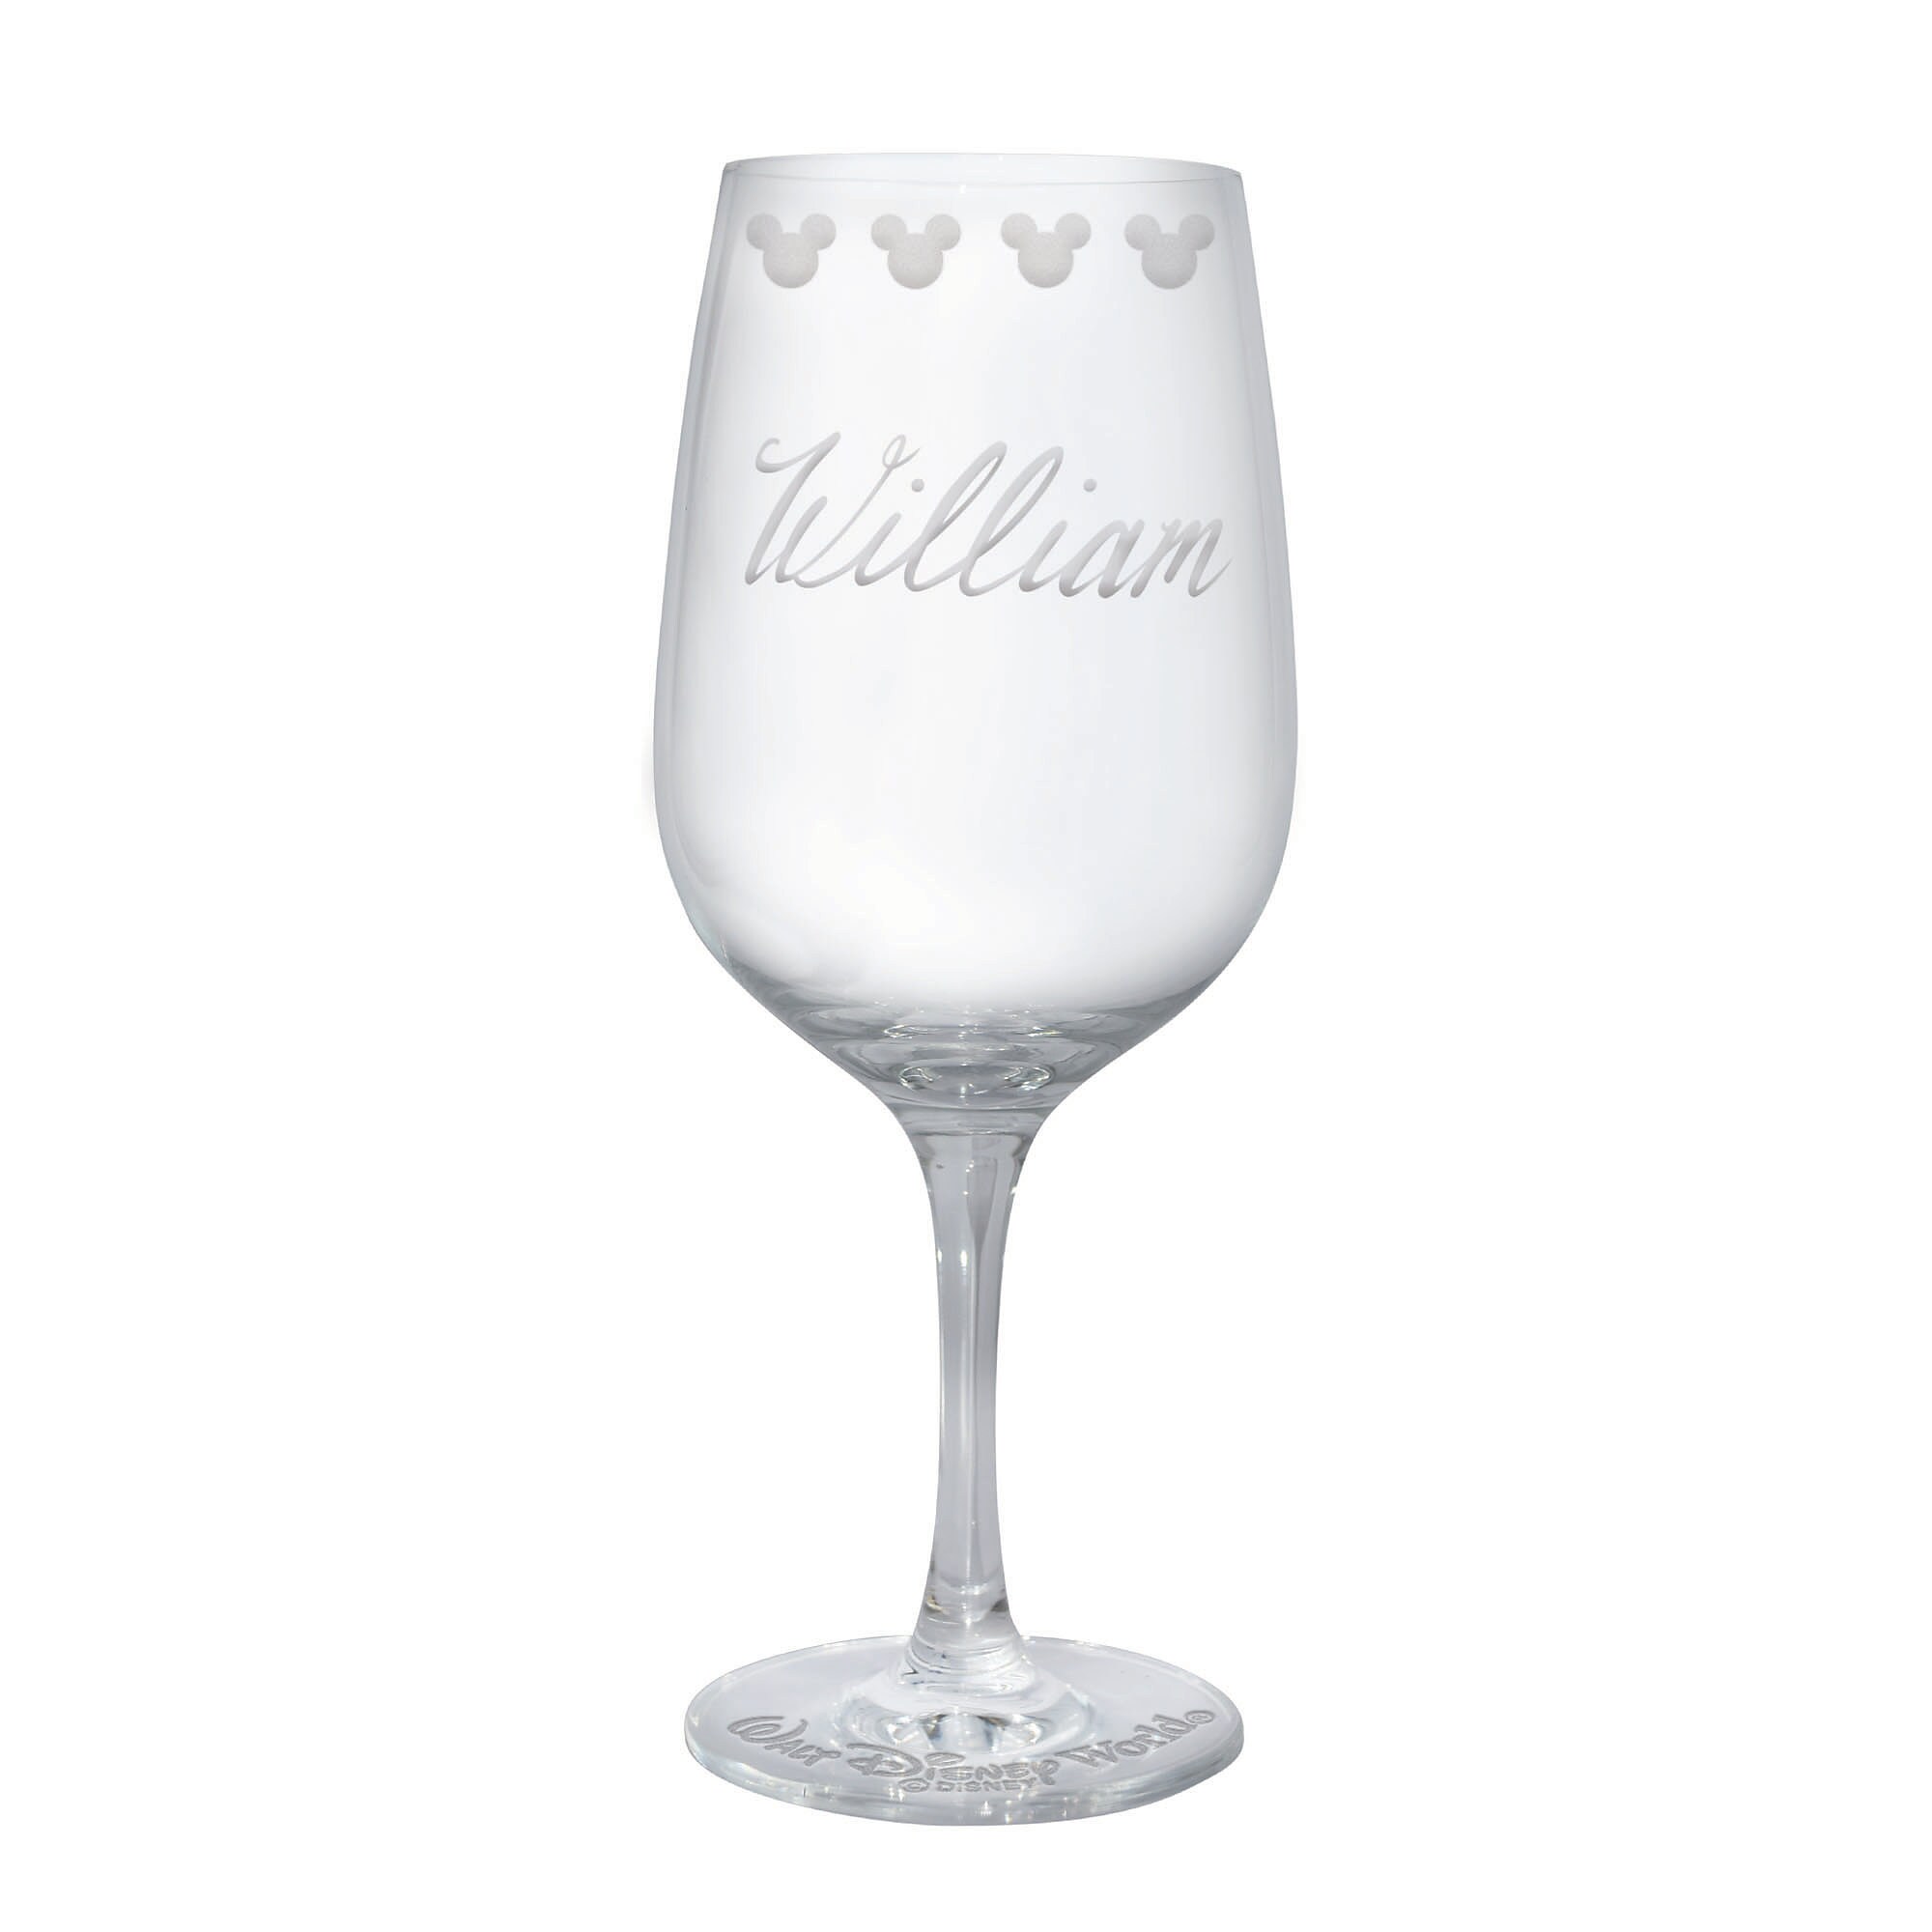 Mickey Mouse Icon Wine Glass by Arribas - Personalizable